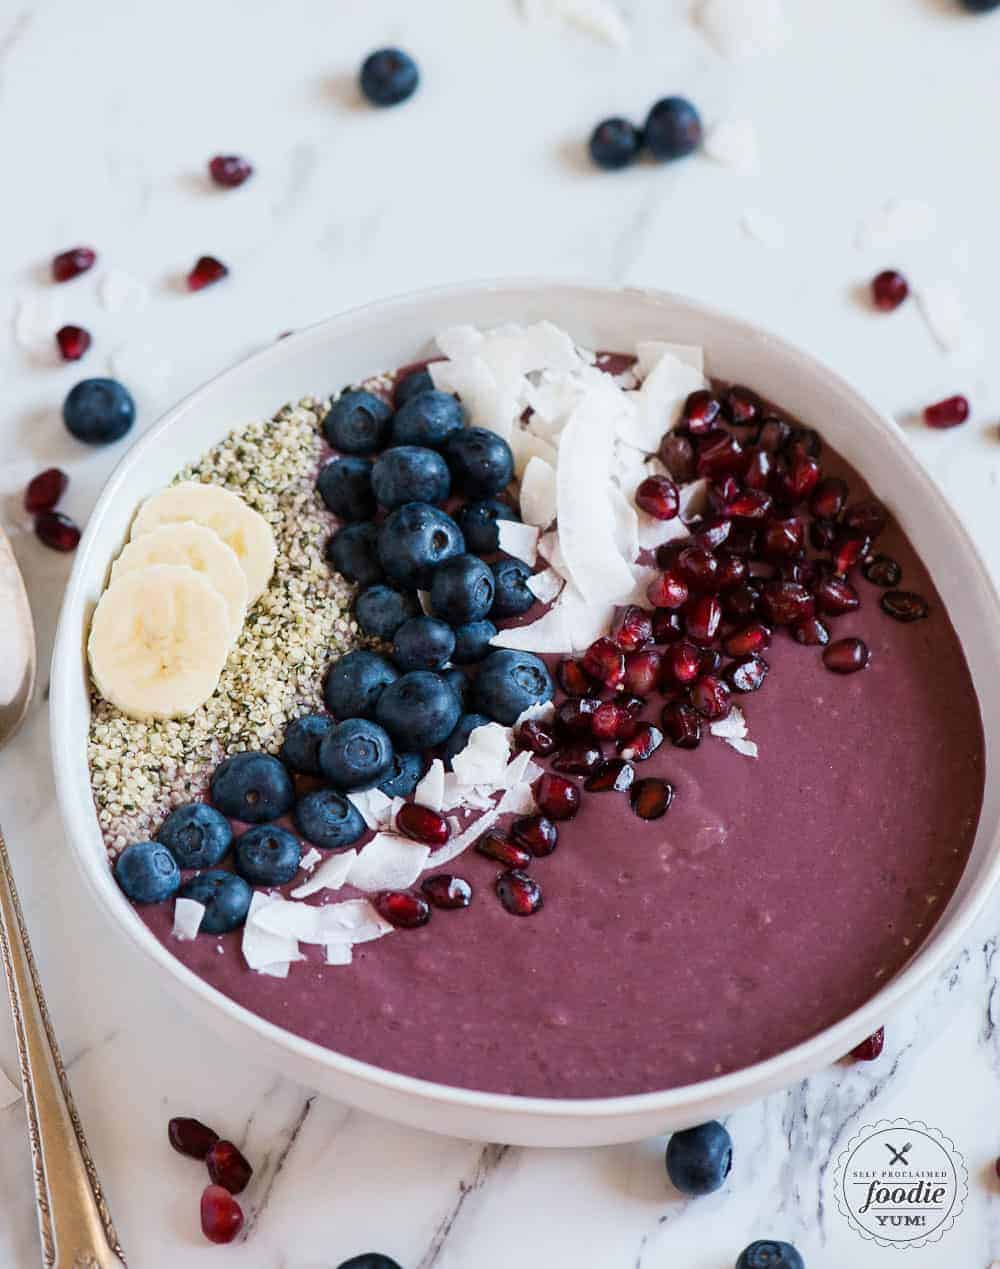 priority video Pronoun Healthy and Easy Acai Bowl Recipe - Self Proclaimed Foodie